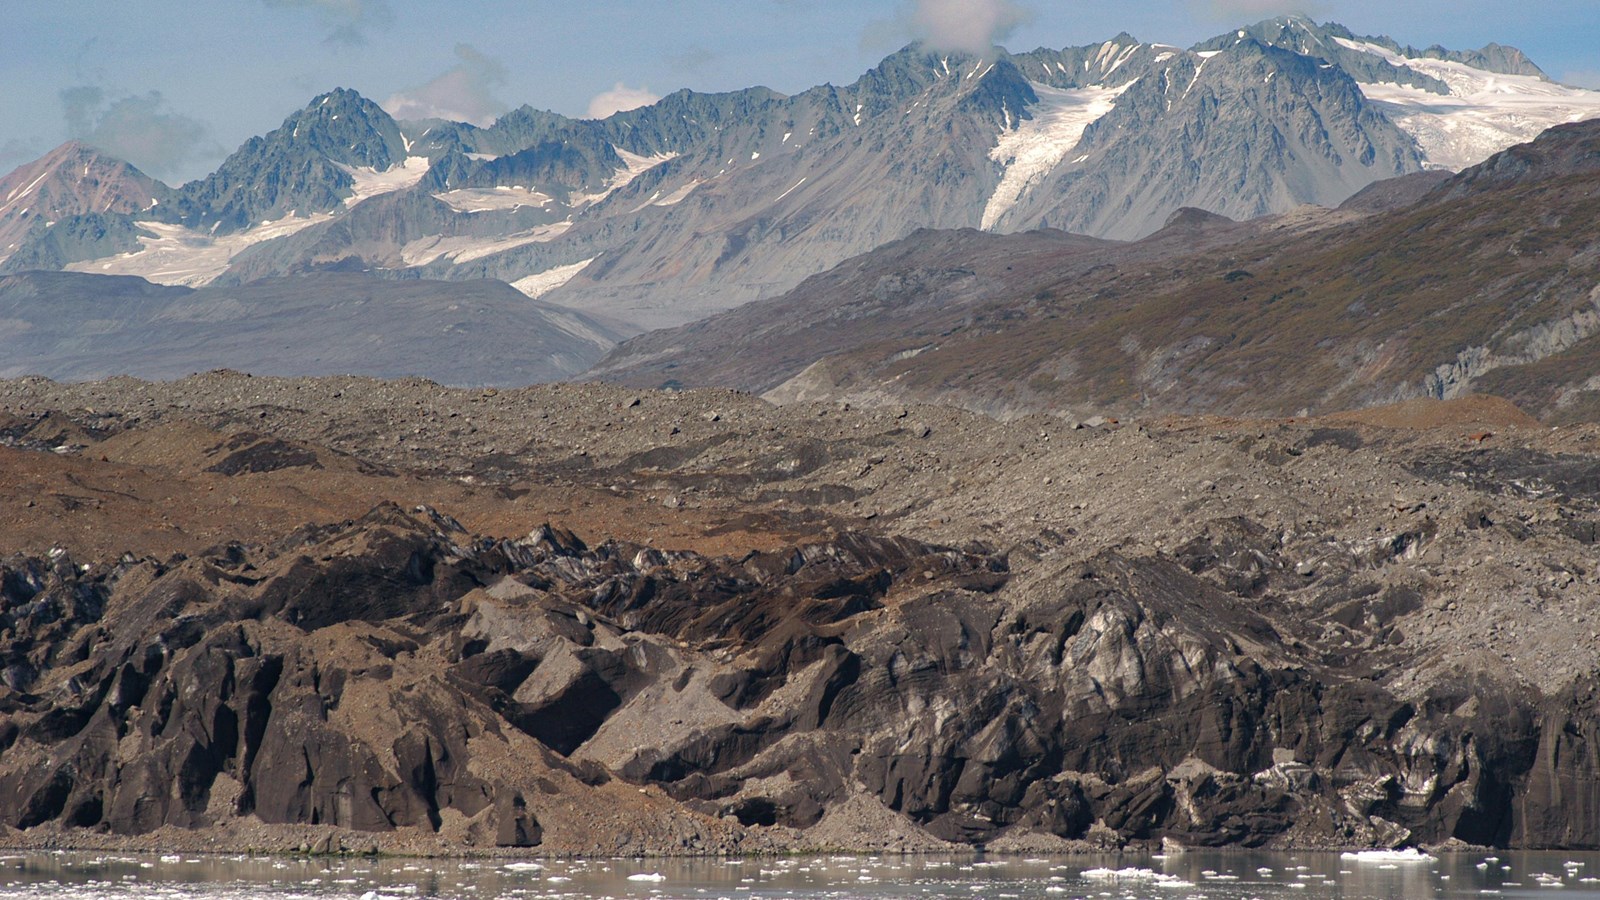 A rocky glacier is covered with brown rock. Distant mountains rise steeply in the background.